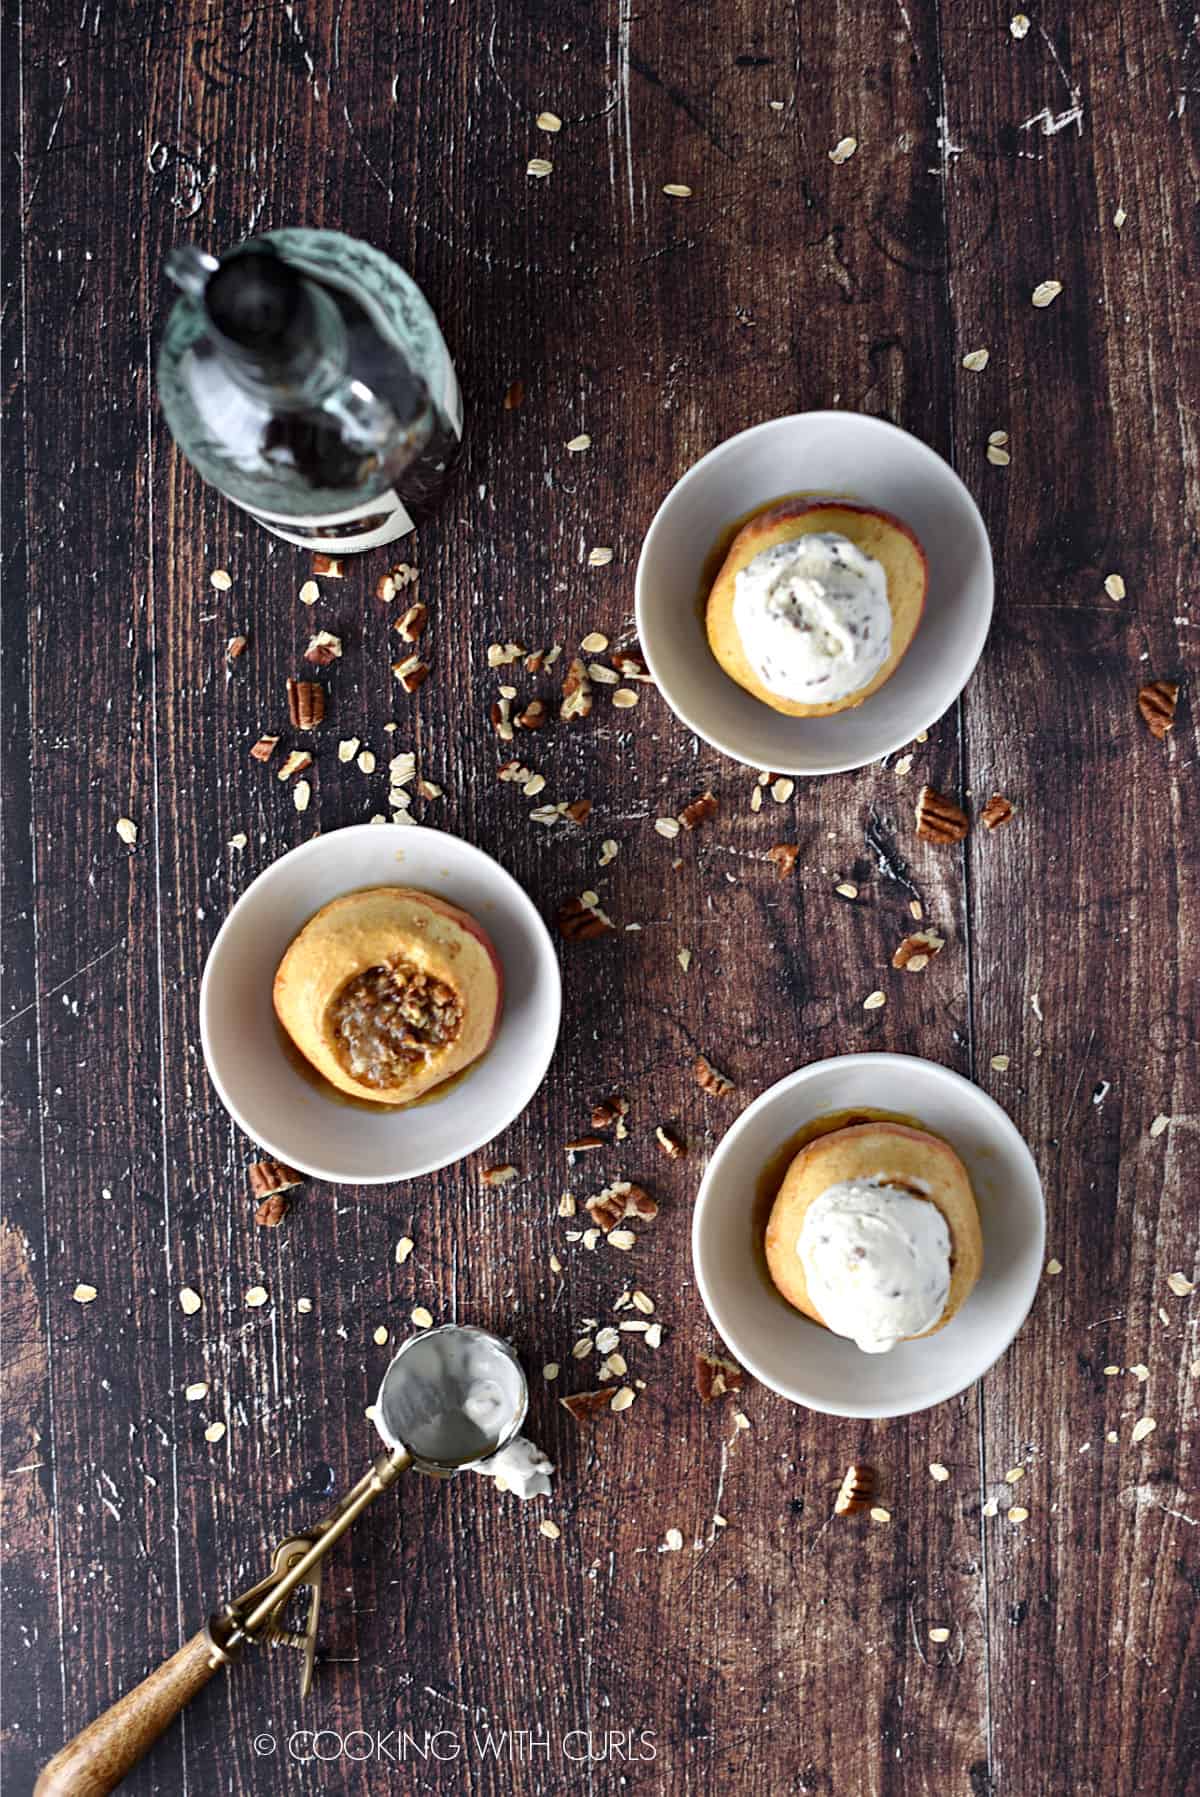 looking down on three small white bowls with spiced rum baked apples, two topped with ice cream. there is an ice cream scoop in the lower left corner and a bottle of spiced rum in the upper left corner.